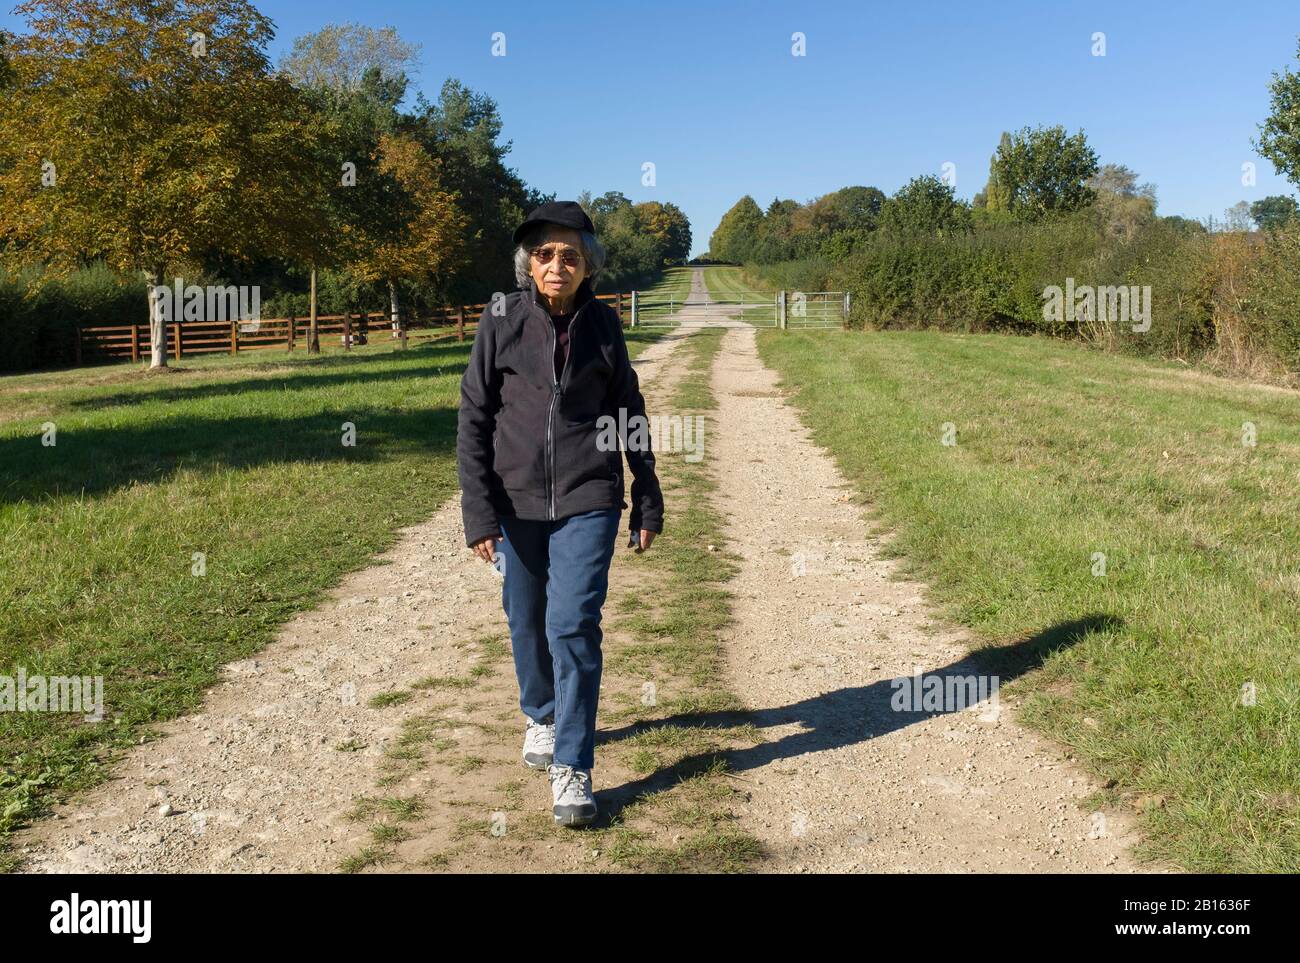 Active senior citizen, an Indian woman's daily fitness regime, walking outdoors as part of a healthy lifestyle, UK Stock Photo